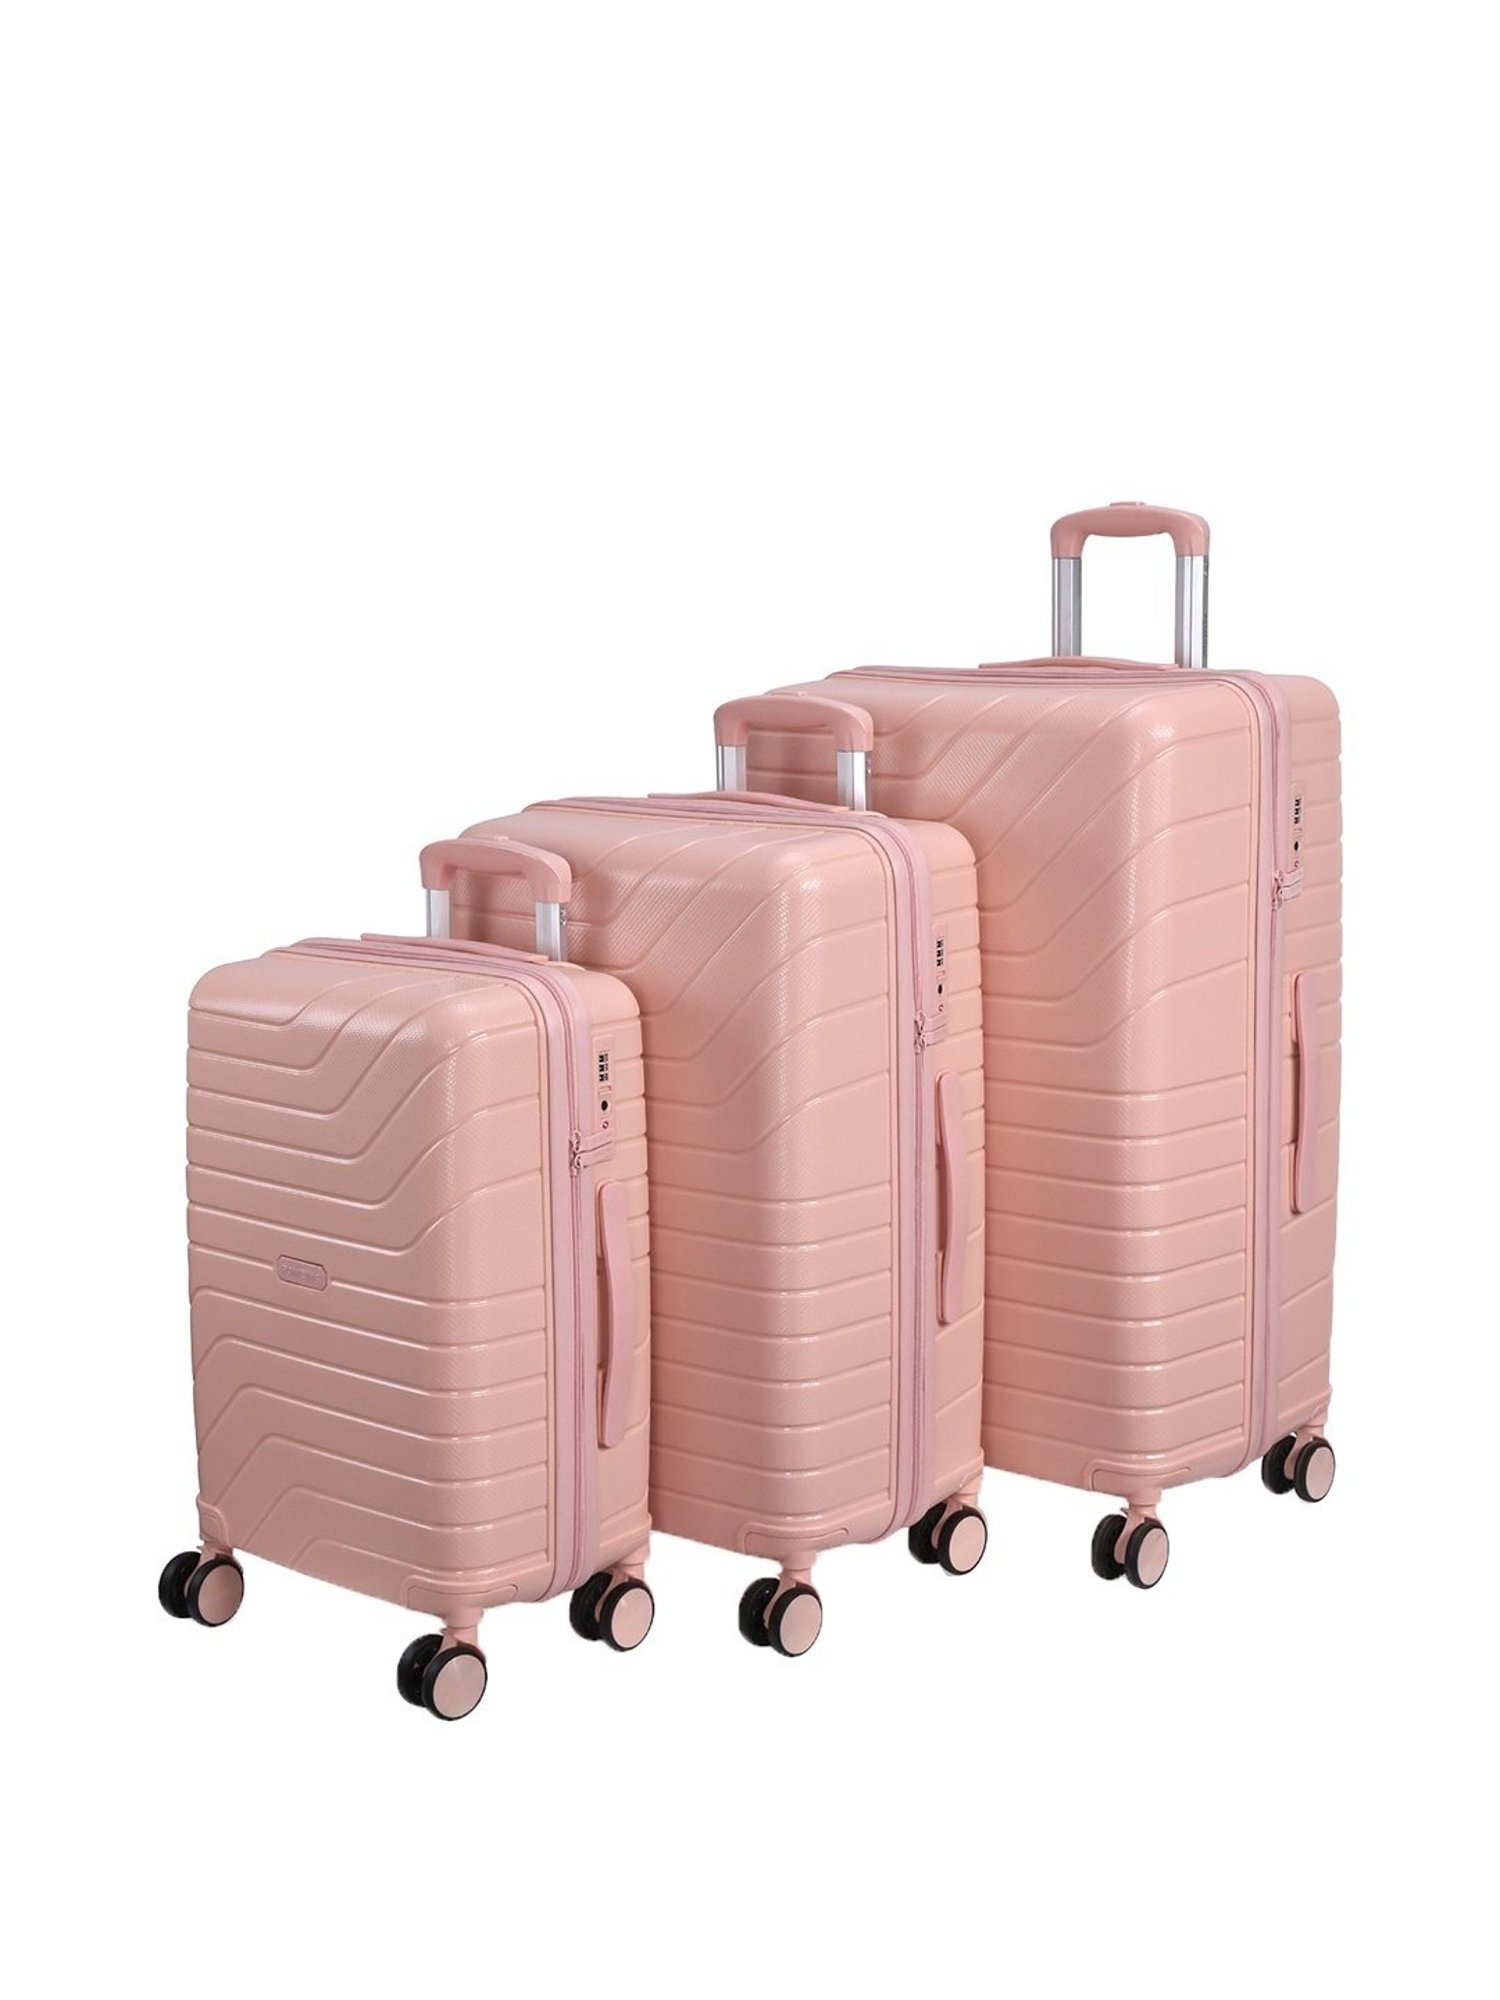 ROMEING Tuscany 28 inch, Polypropylene Luggage, Sky Blue 75 cm Trolley Bag  Check-in Suitcase 8 Wheels - 28 inch Sky Blue - Price in India |  Flipkart.com